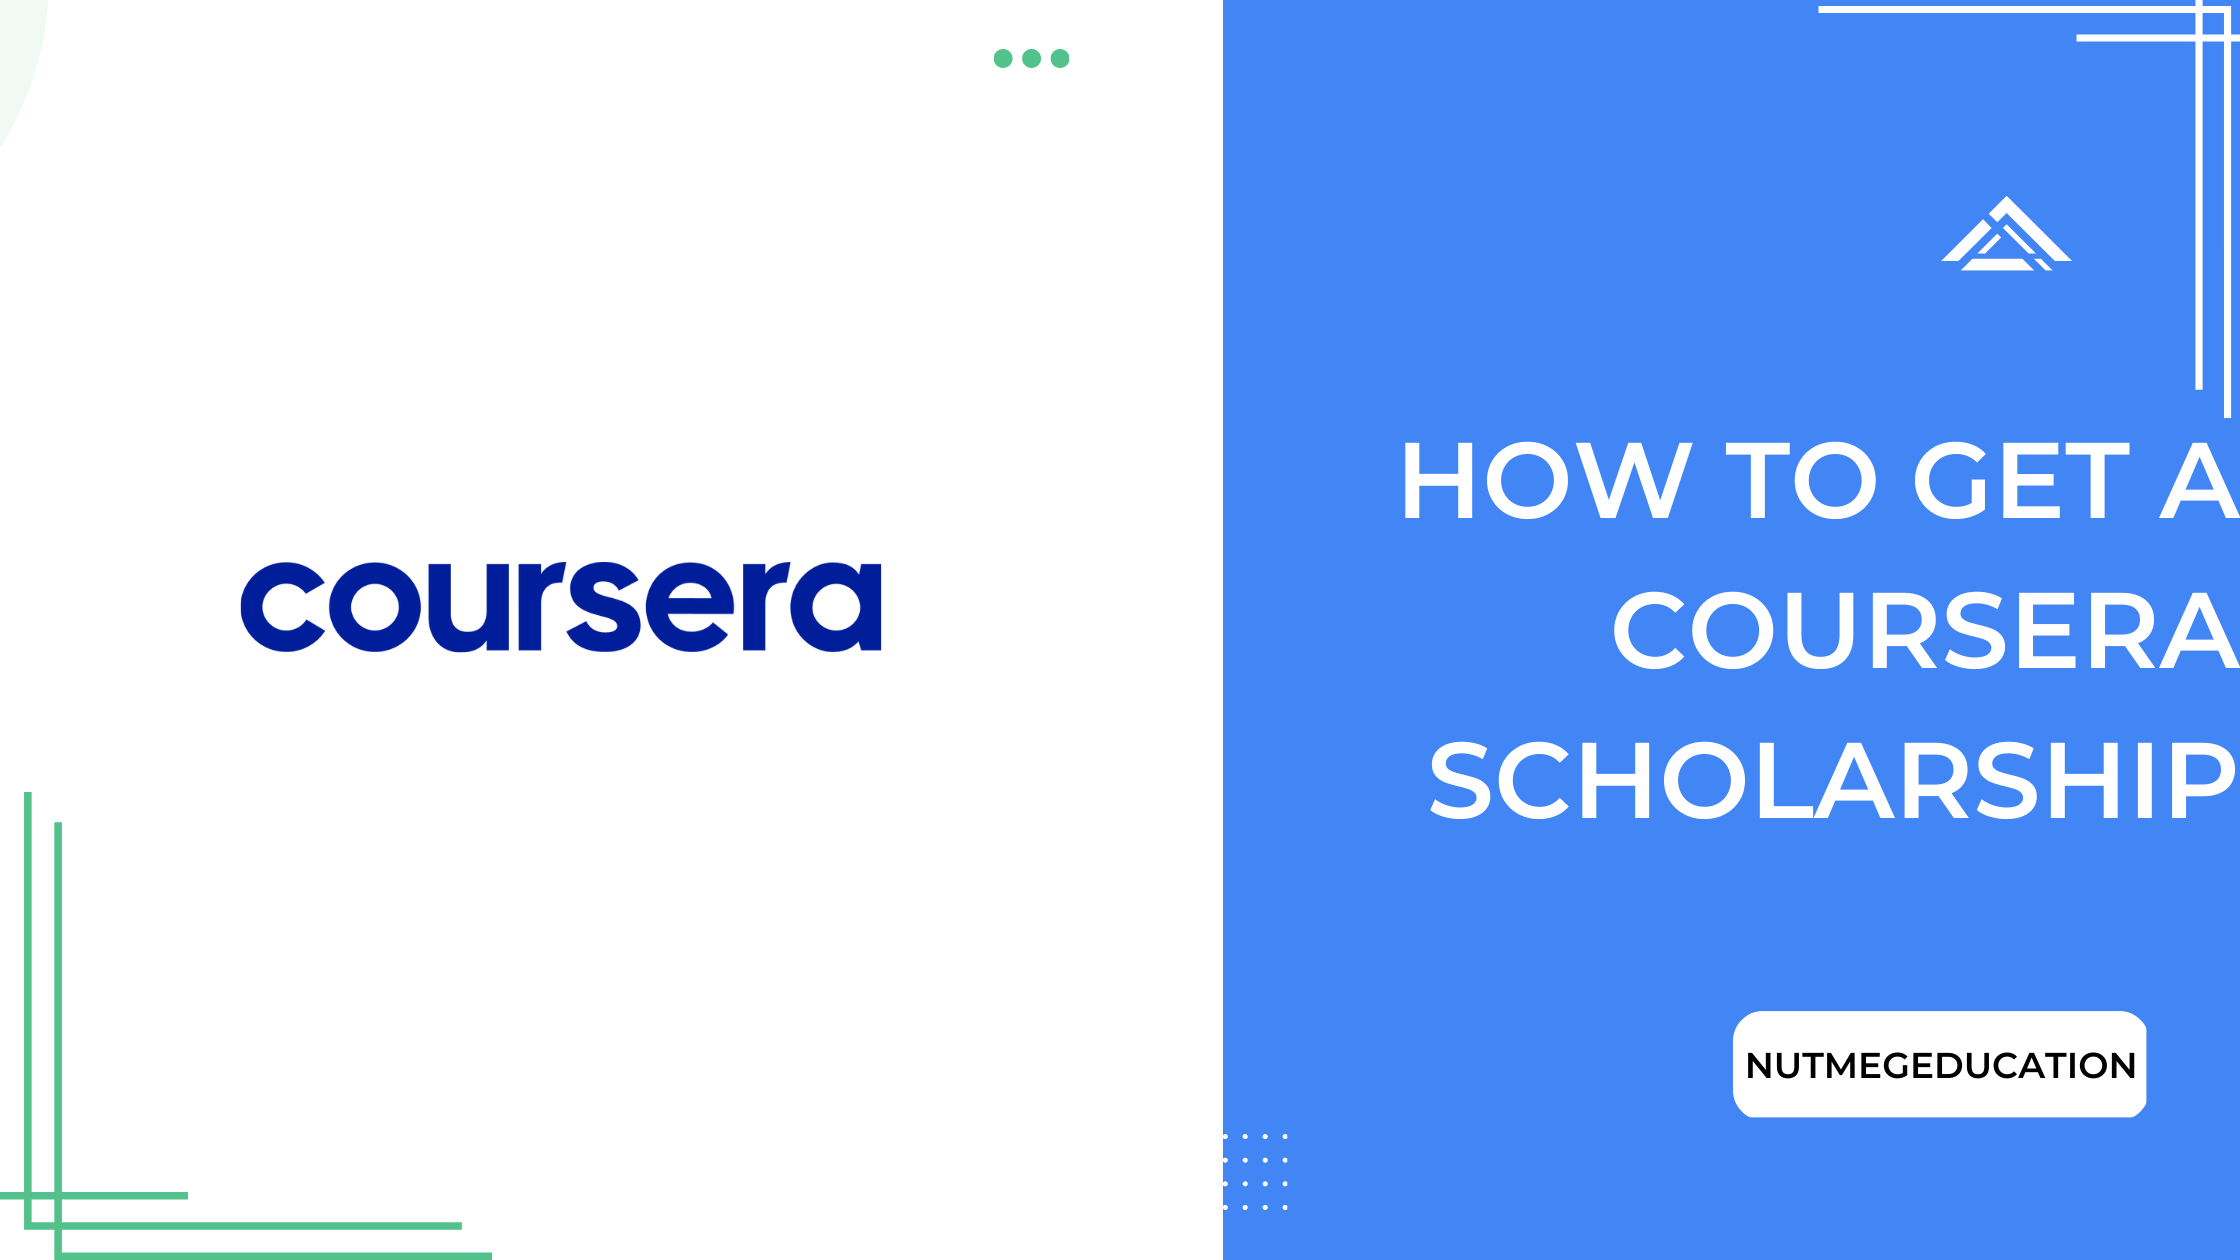 How To Get A Coursera Scholarship - NutMegEducation